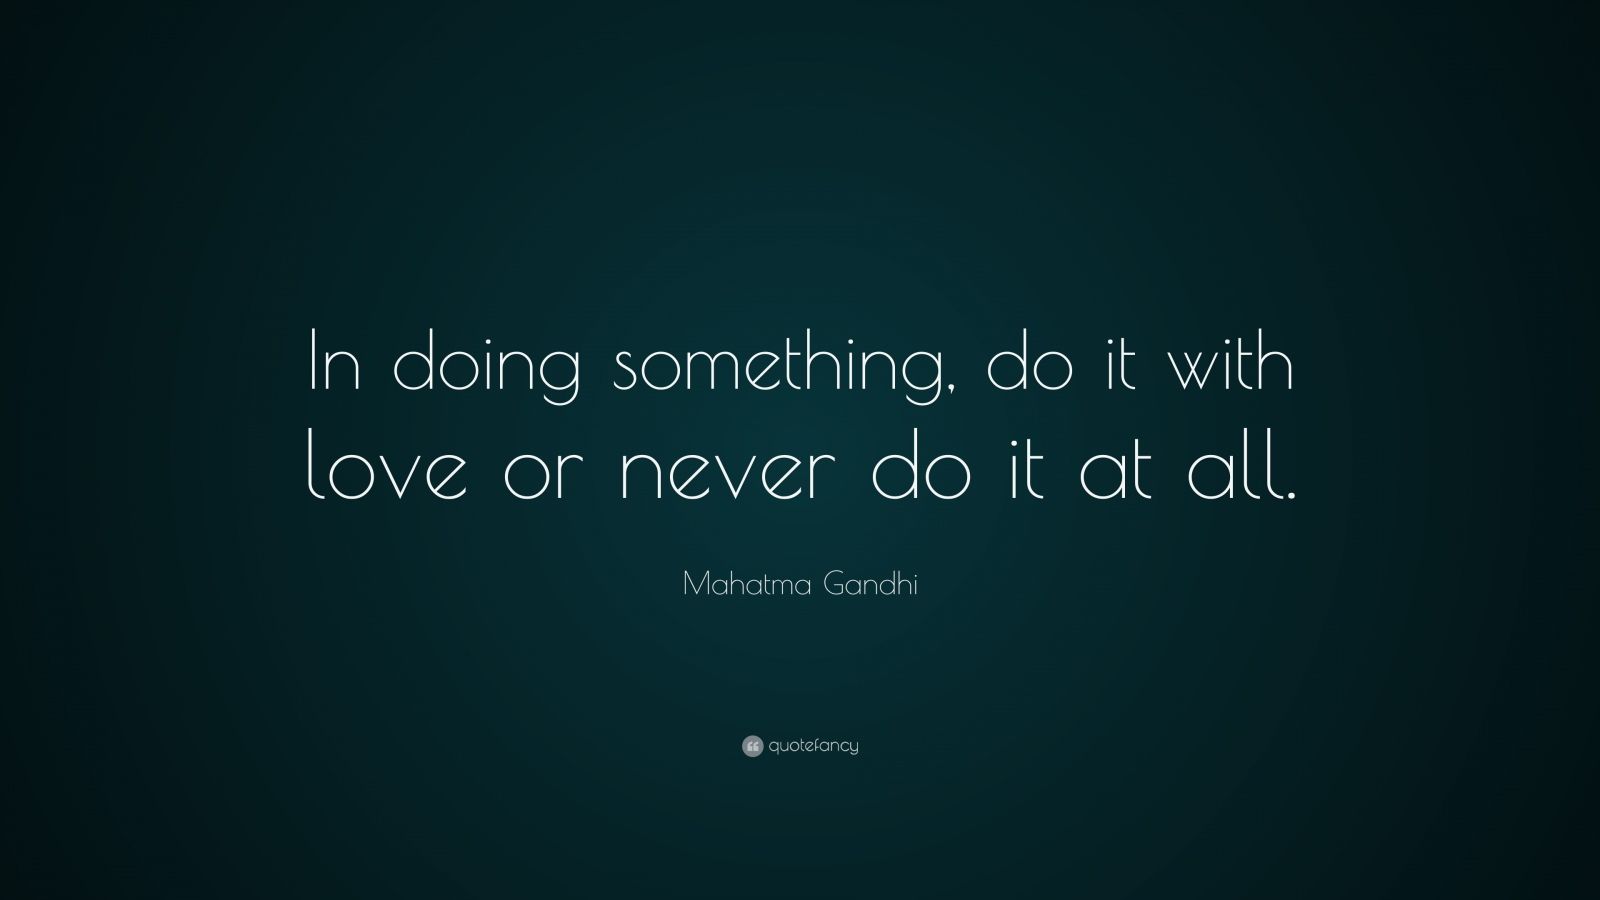 Mahatma Gandhi Quote In Doing Something, Do It With Love Or Never Do It At All 22 -1056